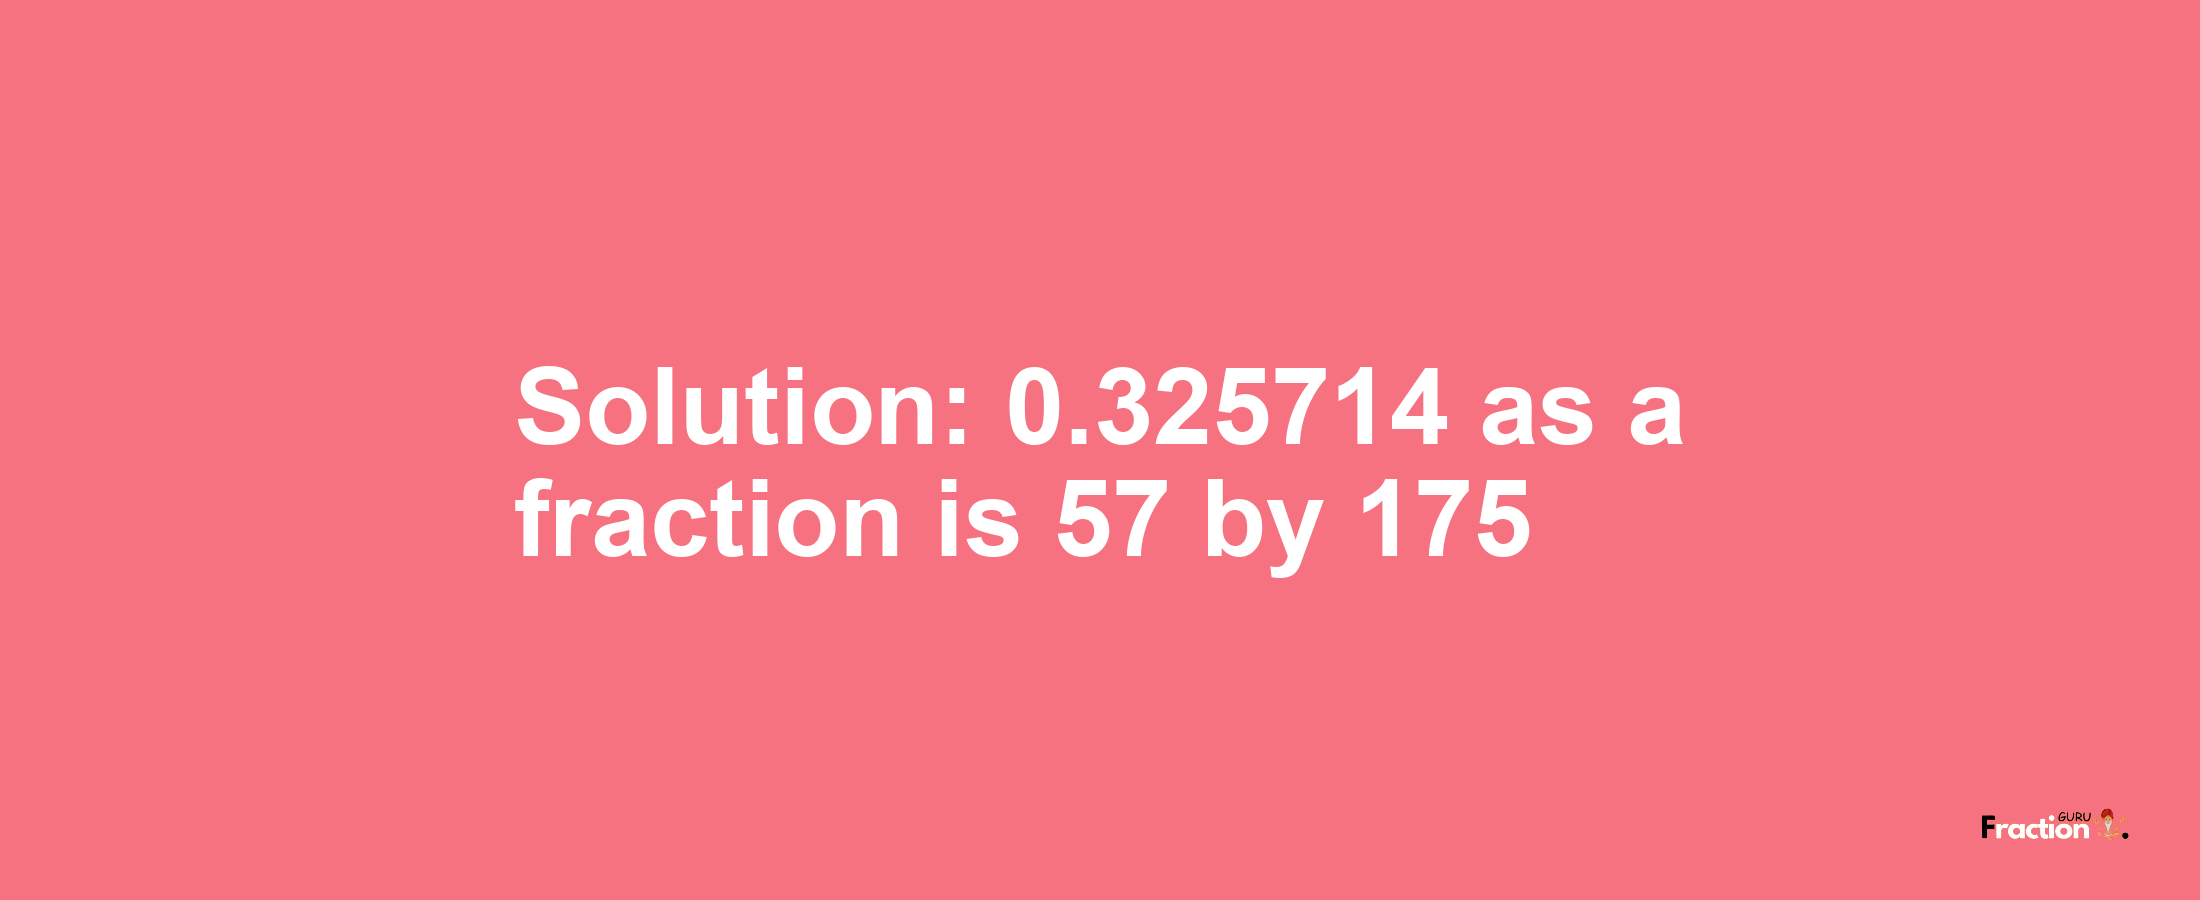 Solution:0.325714 as a fraction is 57/175